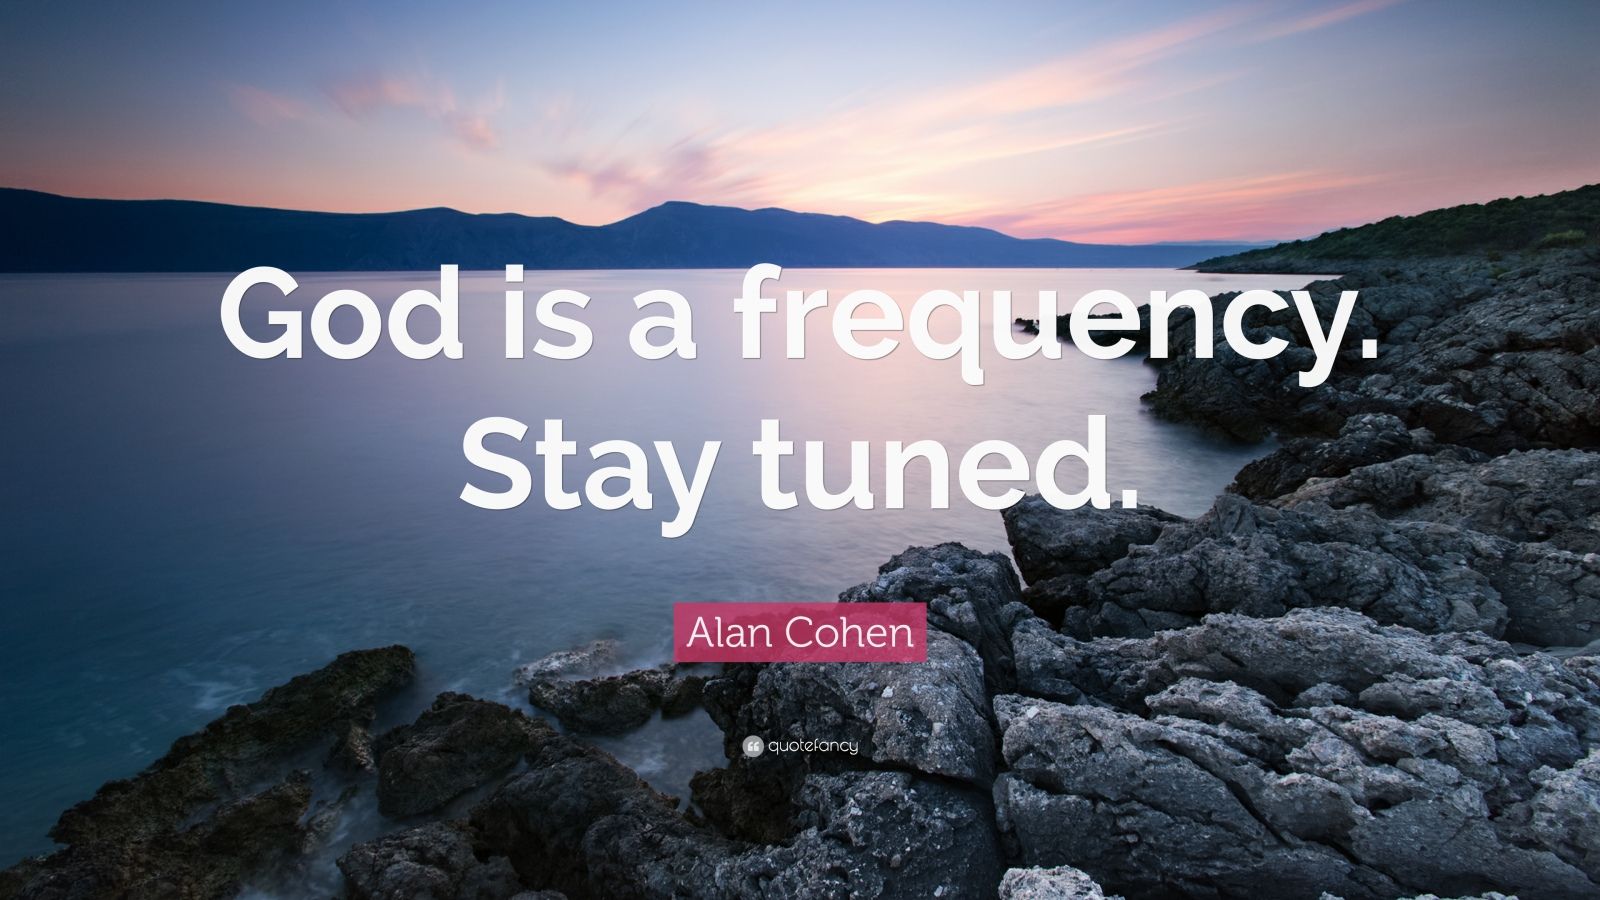 Alan Cohen Quote: “God is a frequency. Stay tuned.”